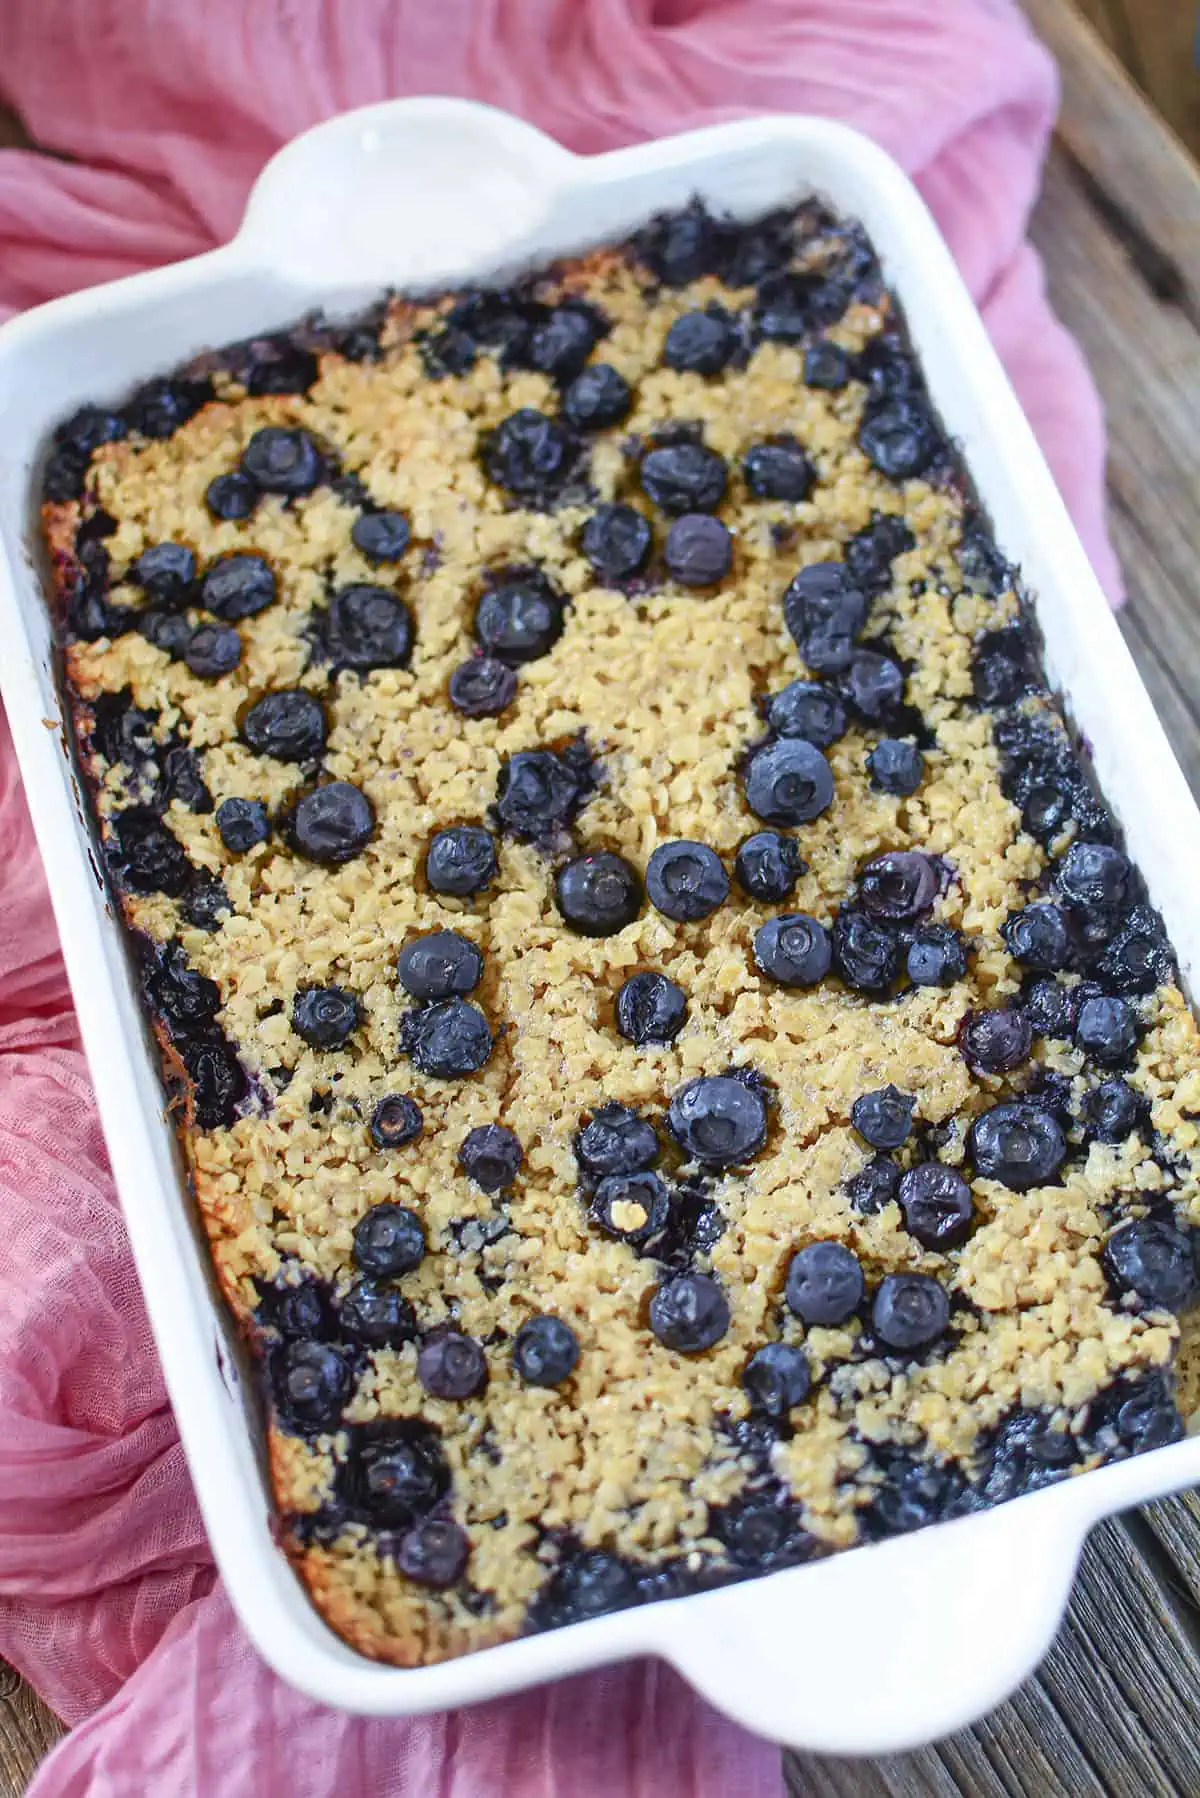 A baking dish filled with the blueberry baked oats.